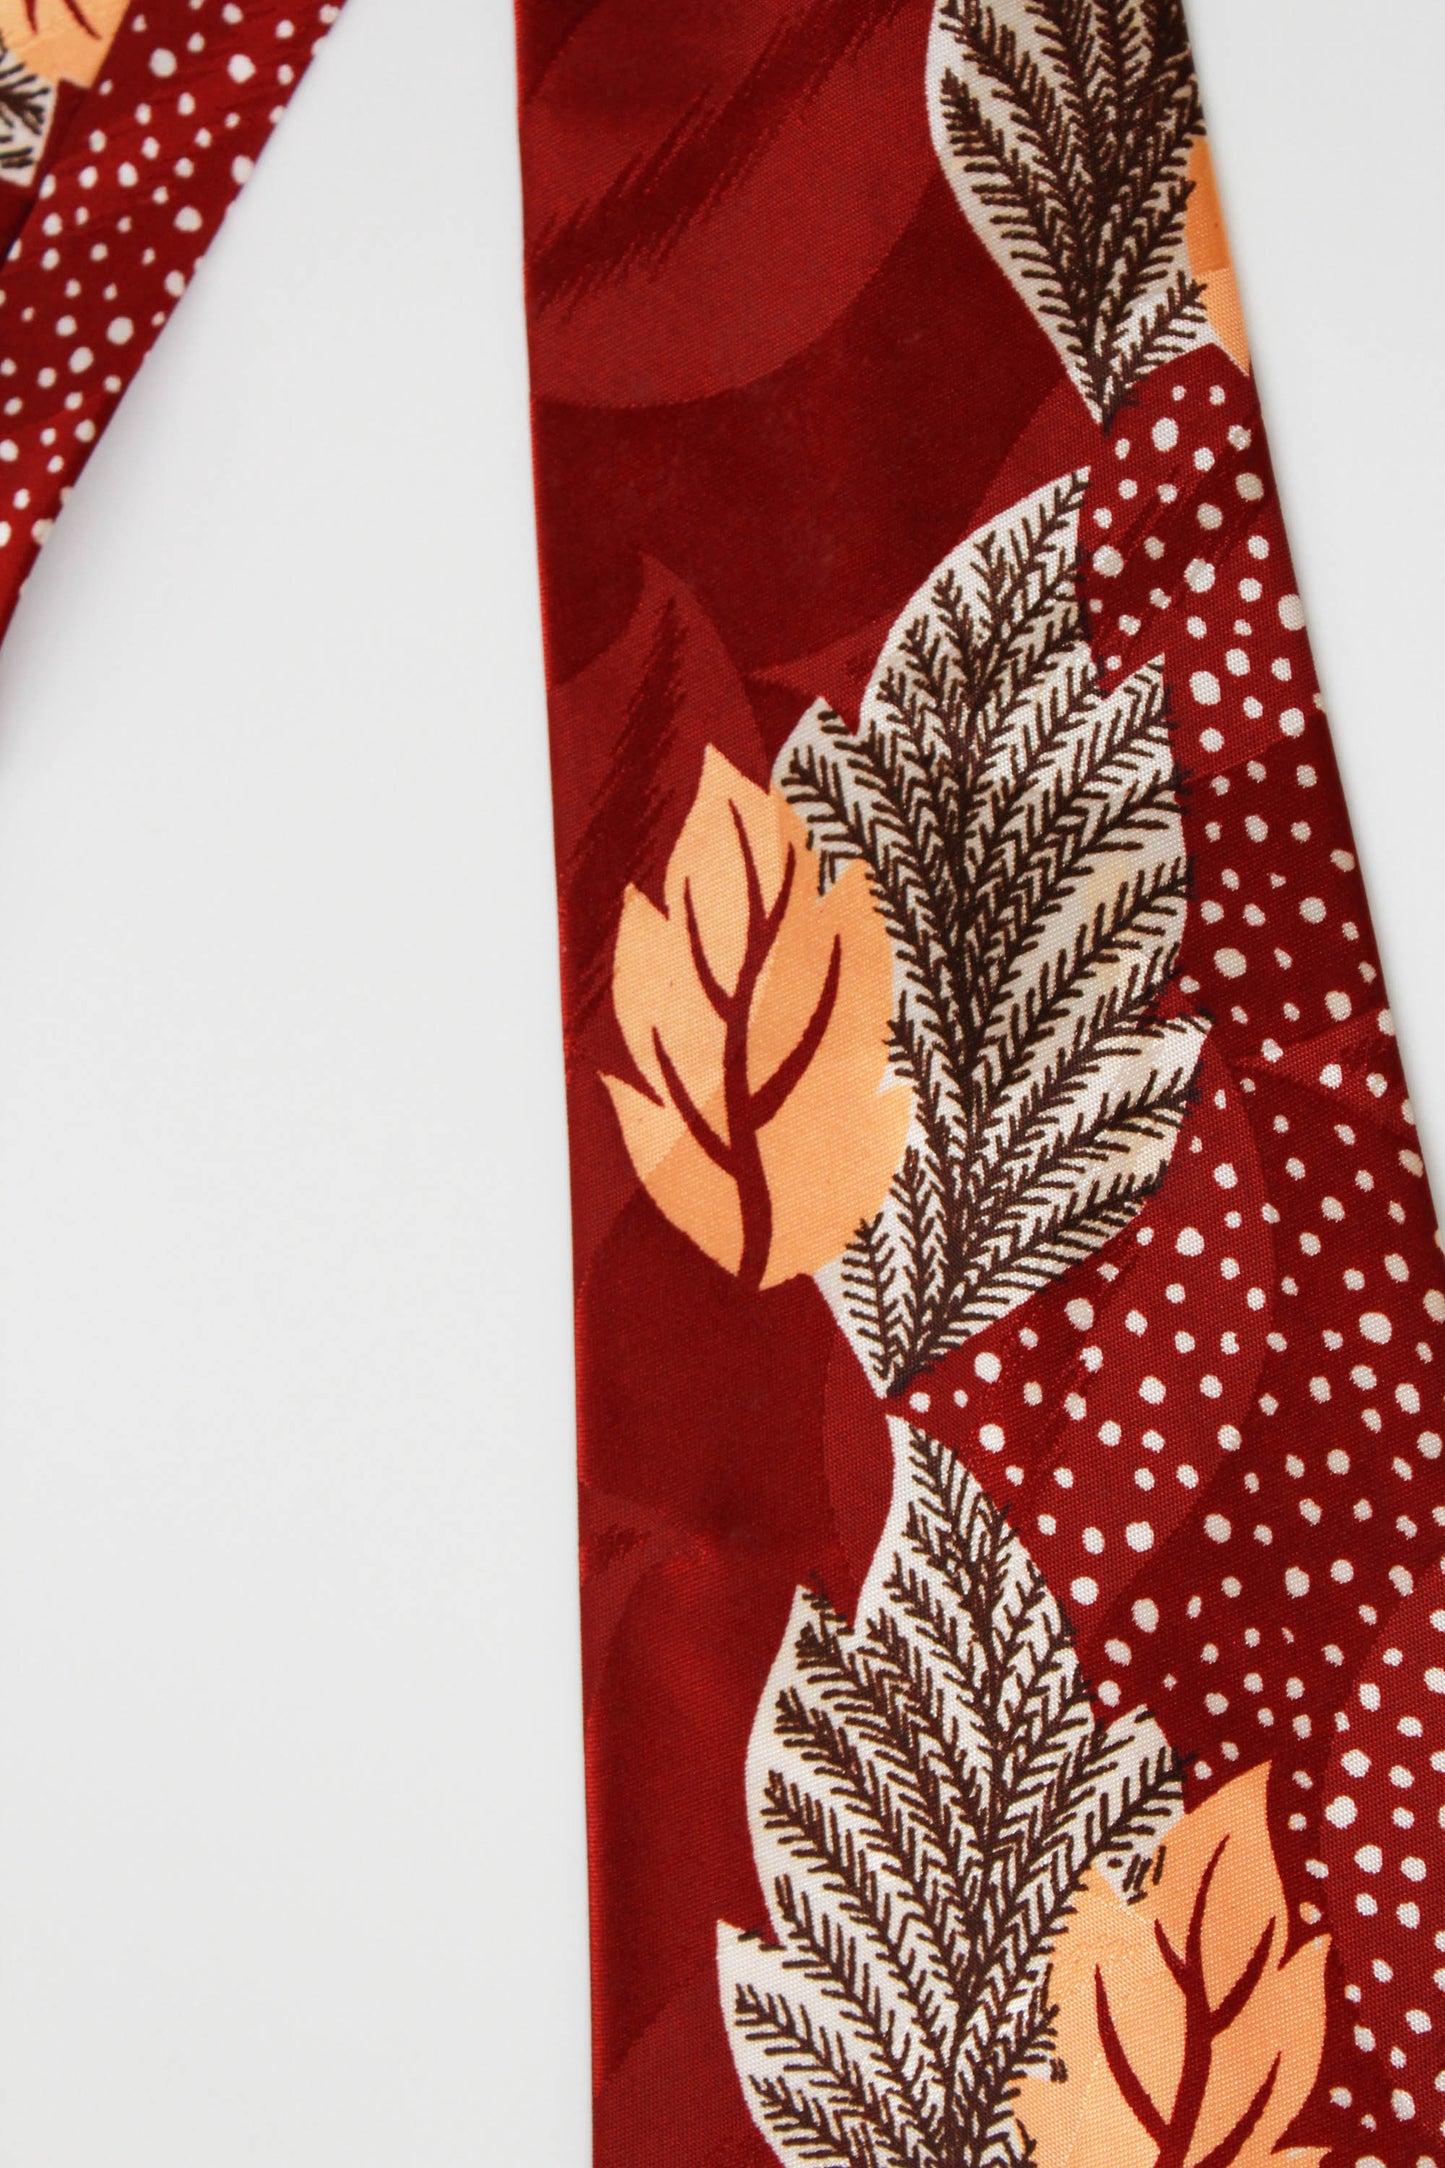 1940s Red Rayon Necktie with Leaf Print